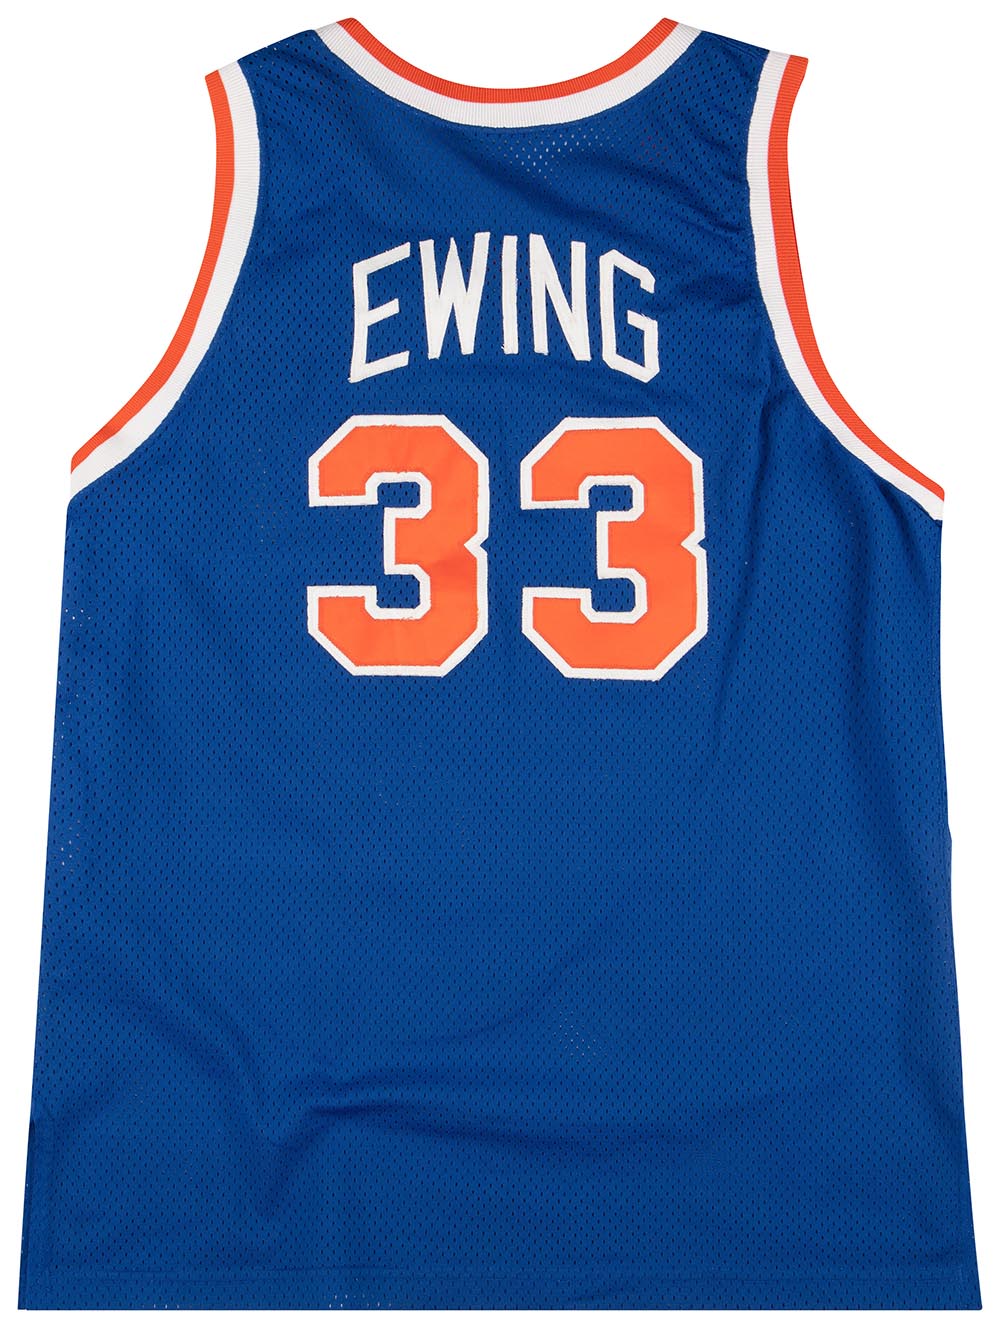 Mitchell & Ness Patrick Ewing 1991 Authentic Jersey NBA All-Star